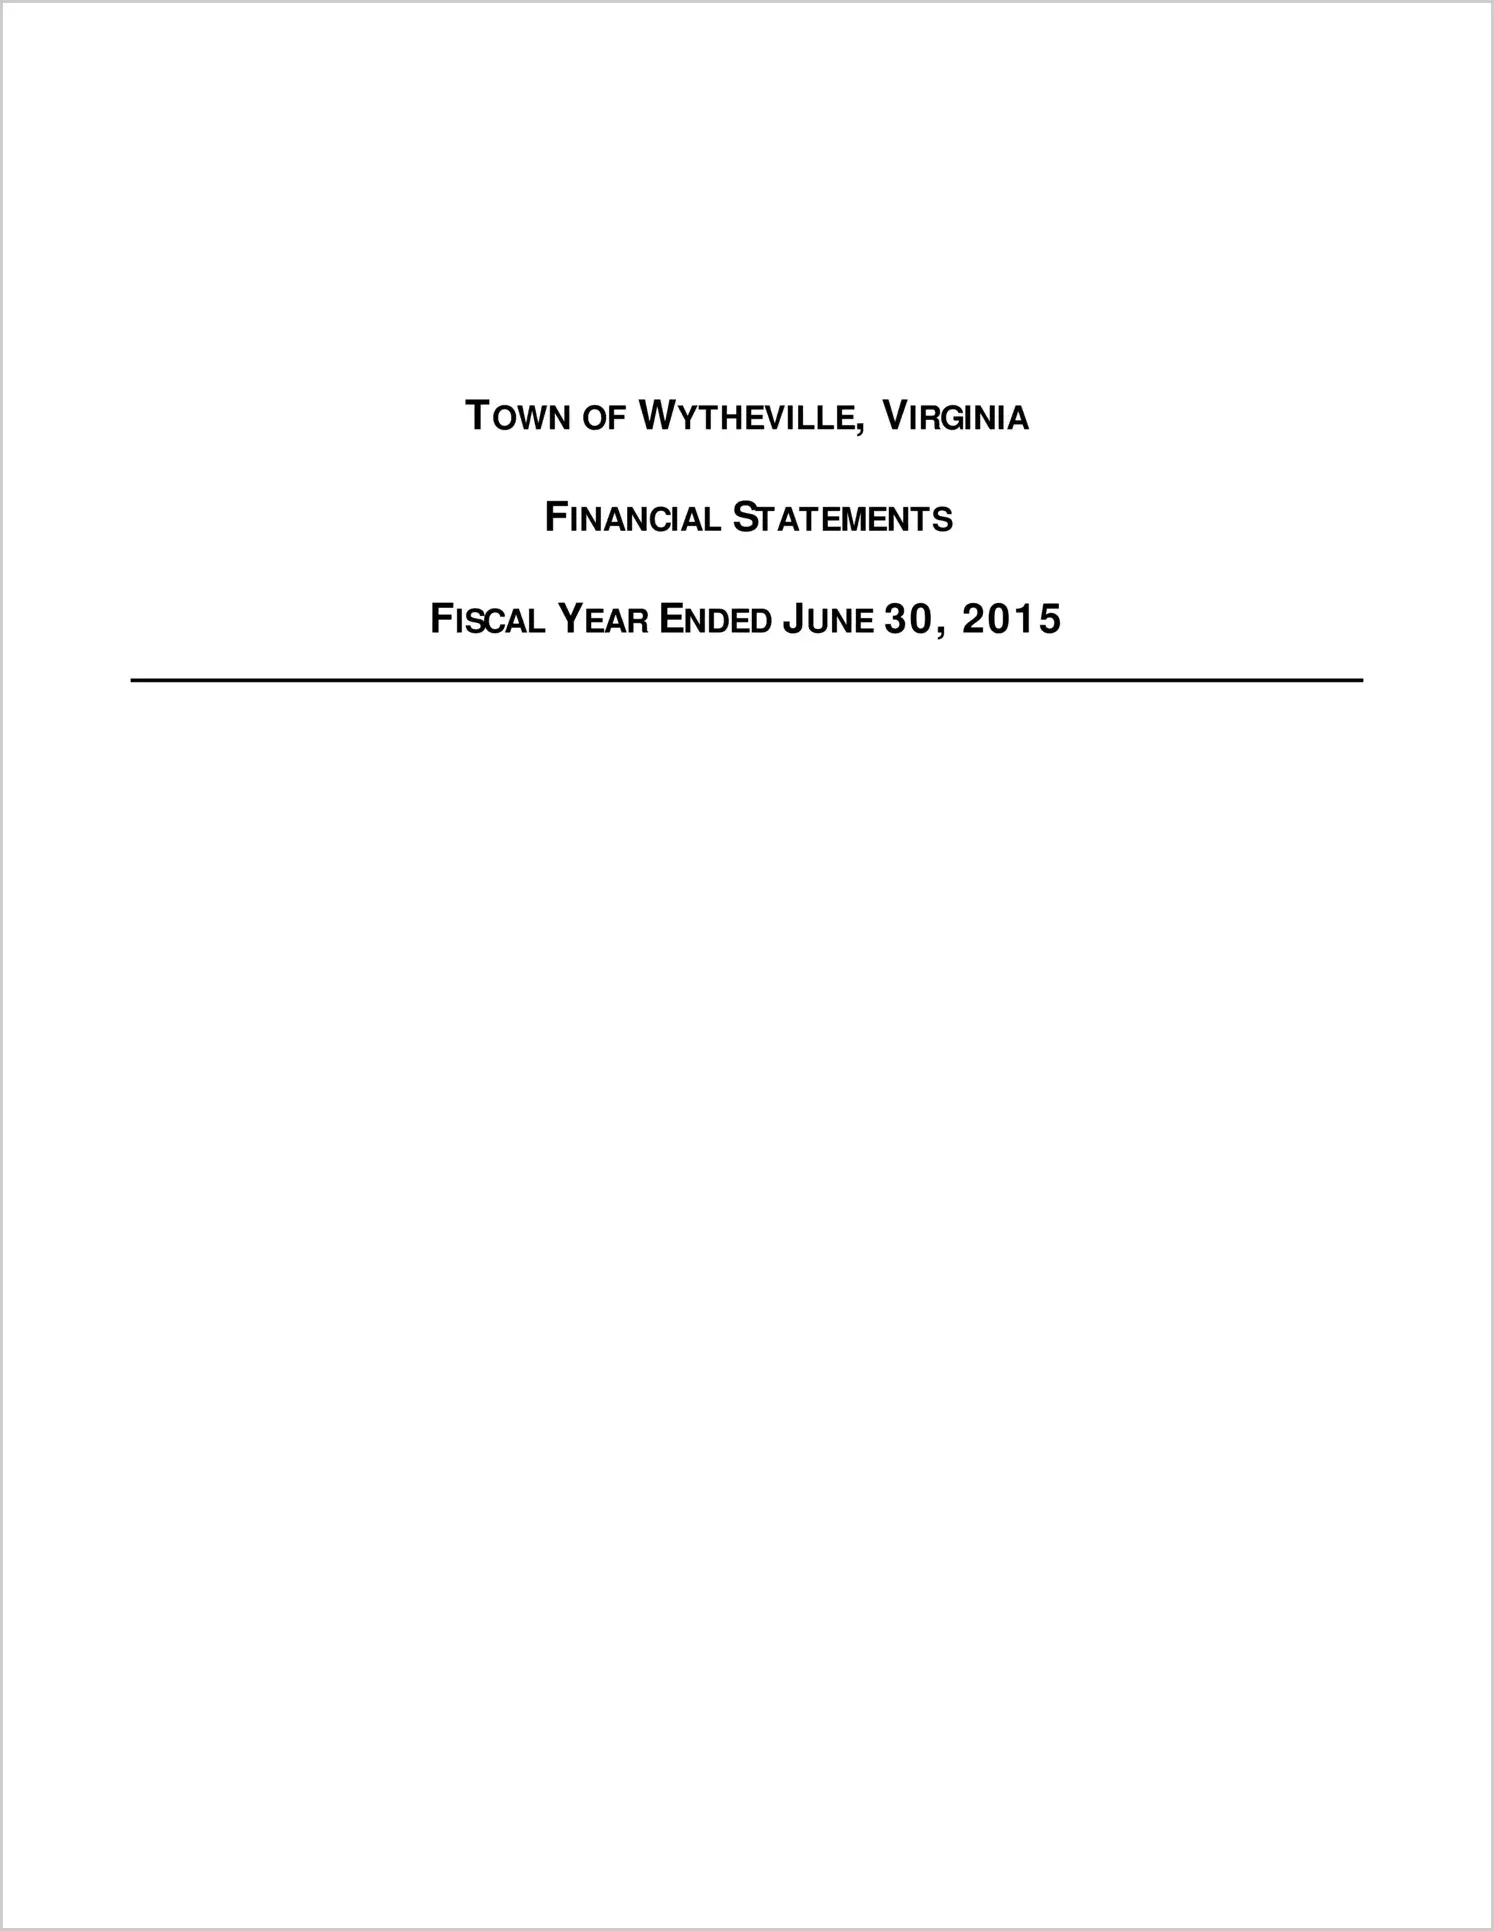 2015 Annual Financial Report for Town of Wytheville